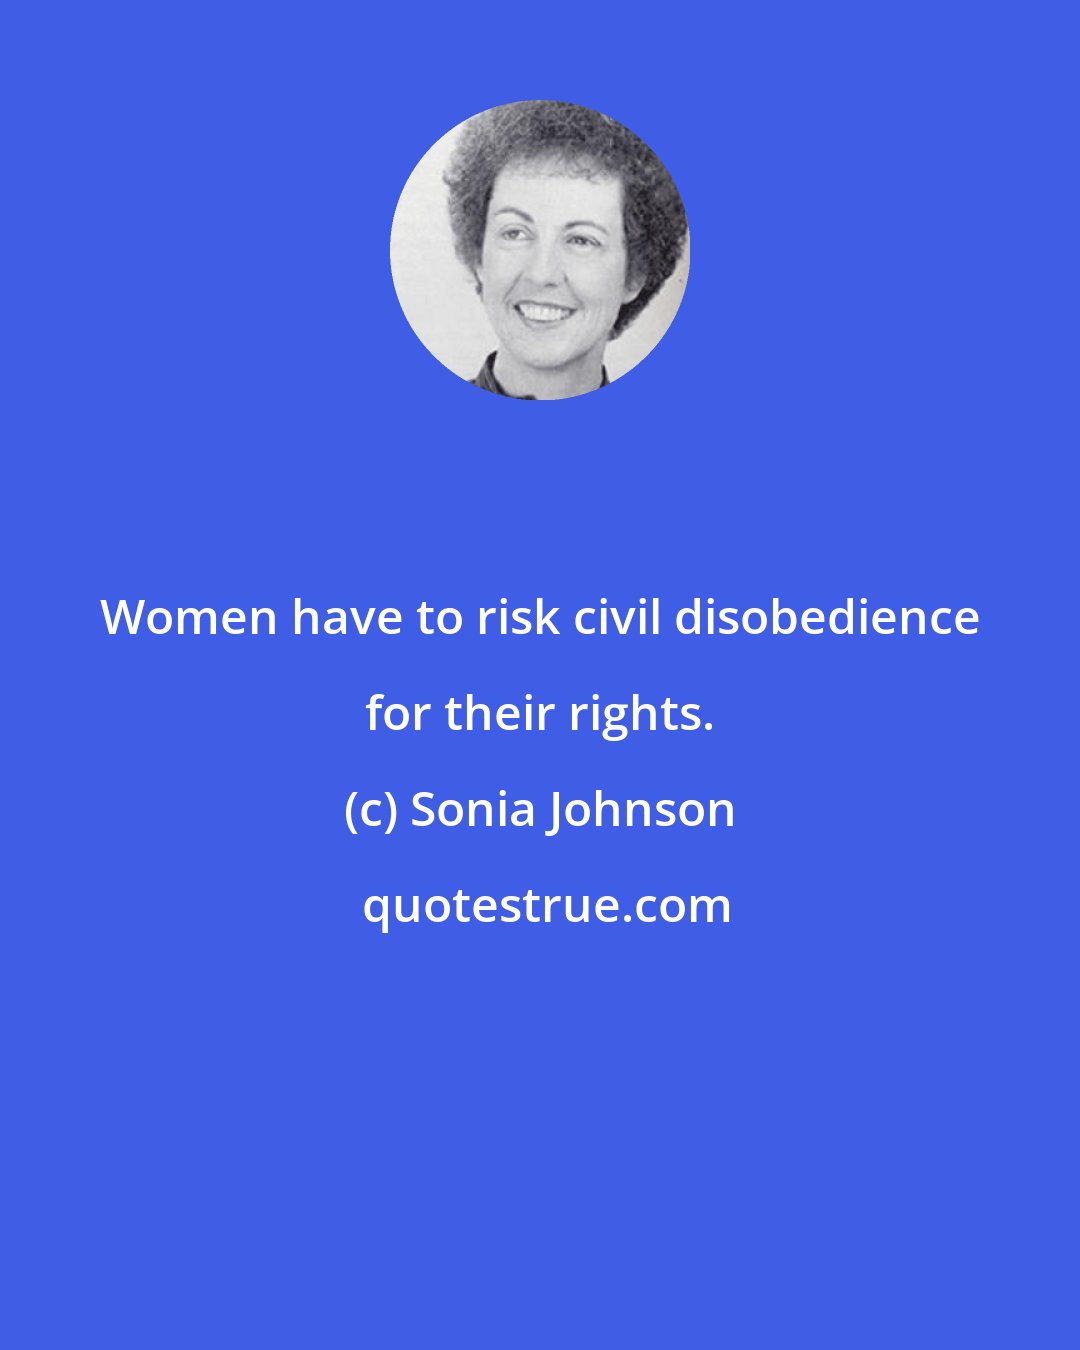 Sonia Johnson: Women have to risk civil disobedience for their rights.